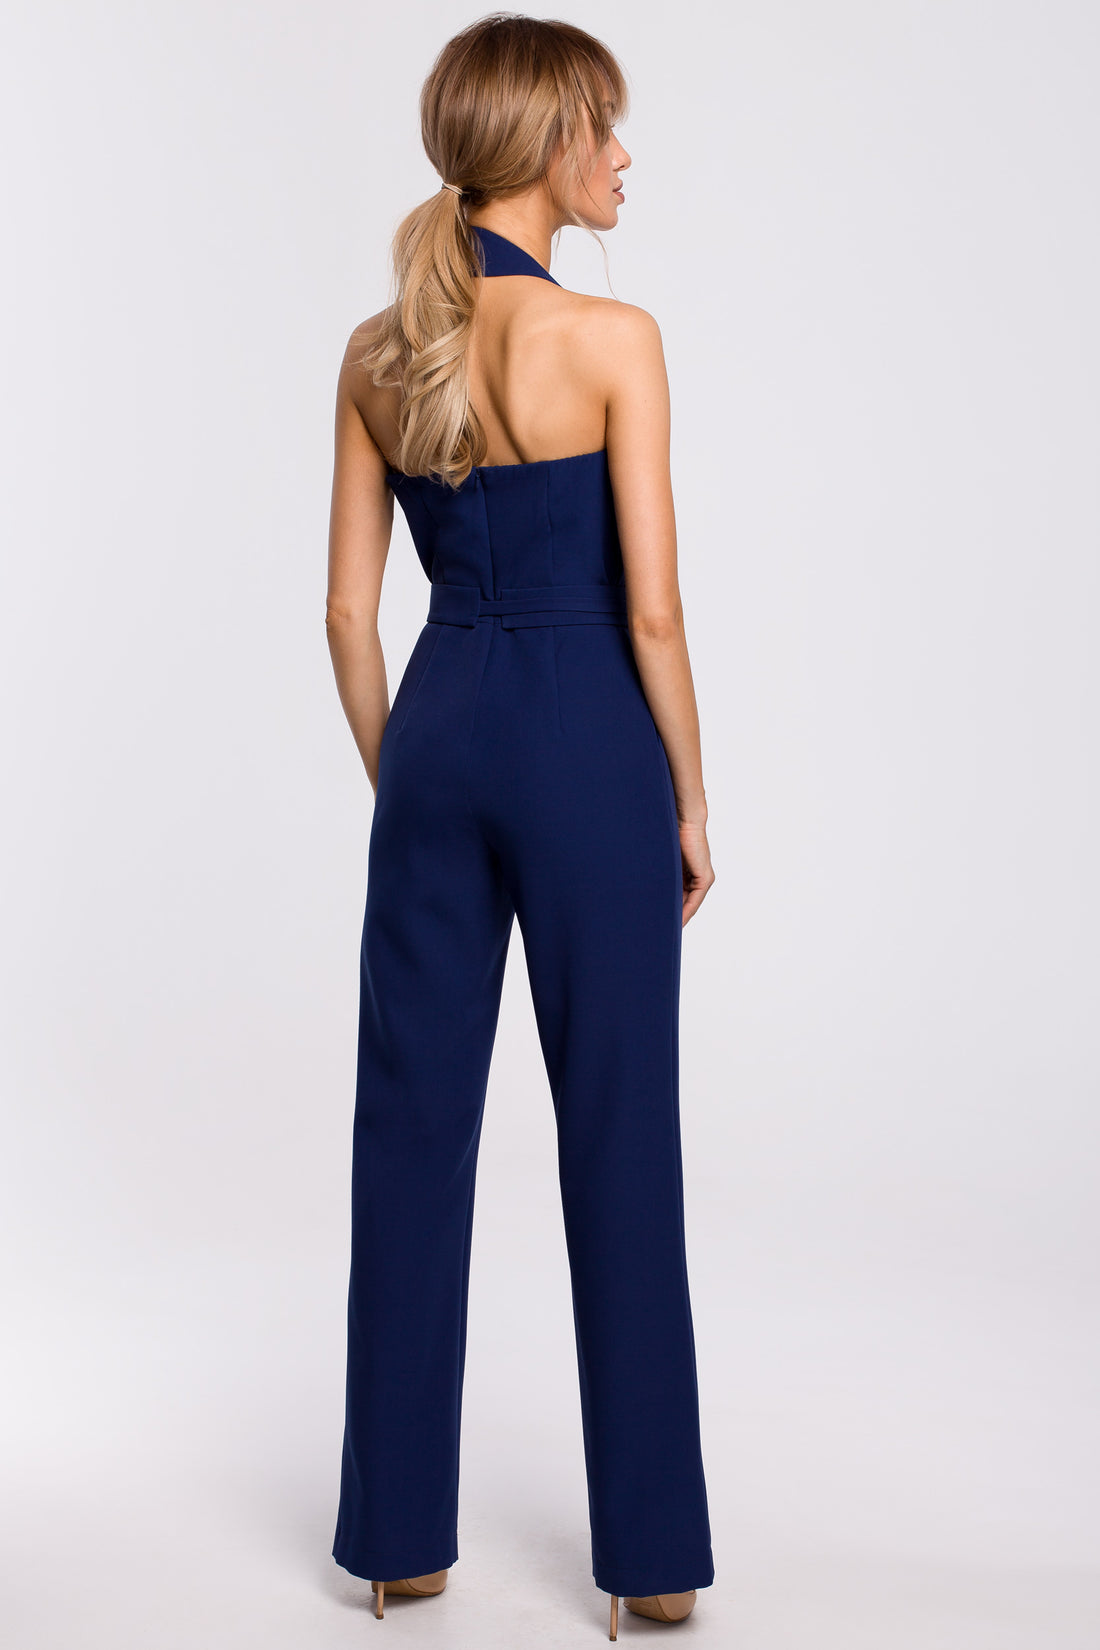 Womens Jumpsuit With Pockets Navy Blue